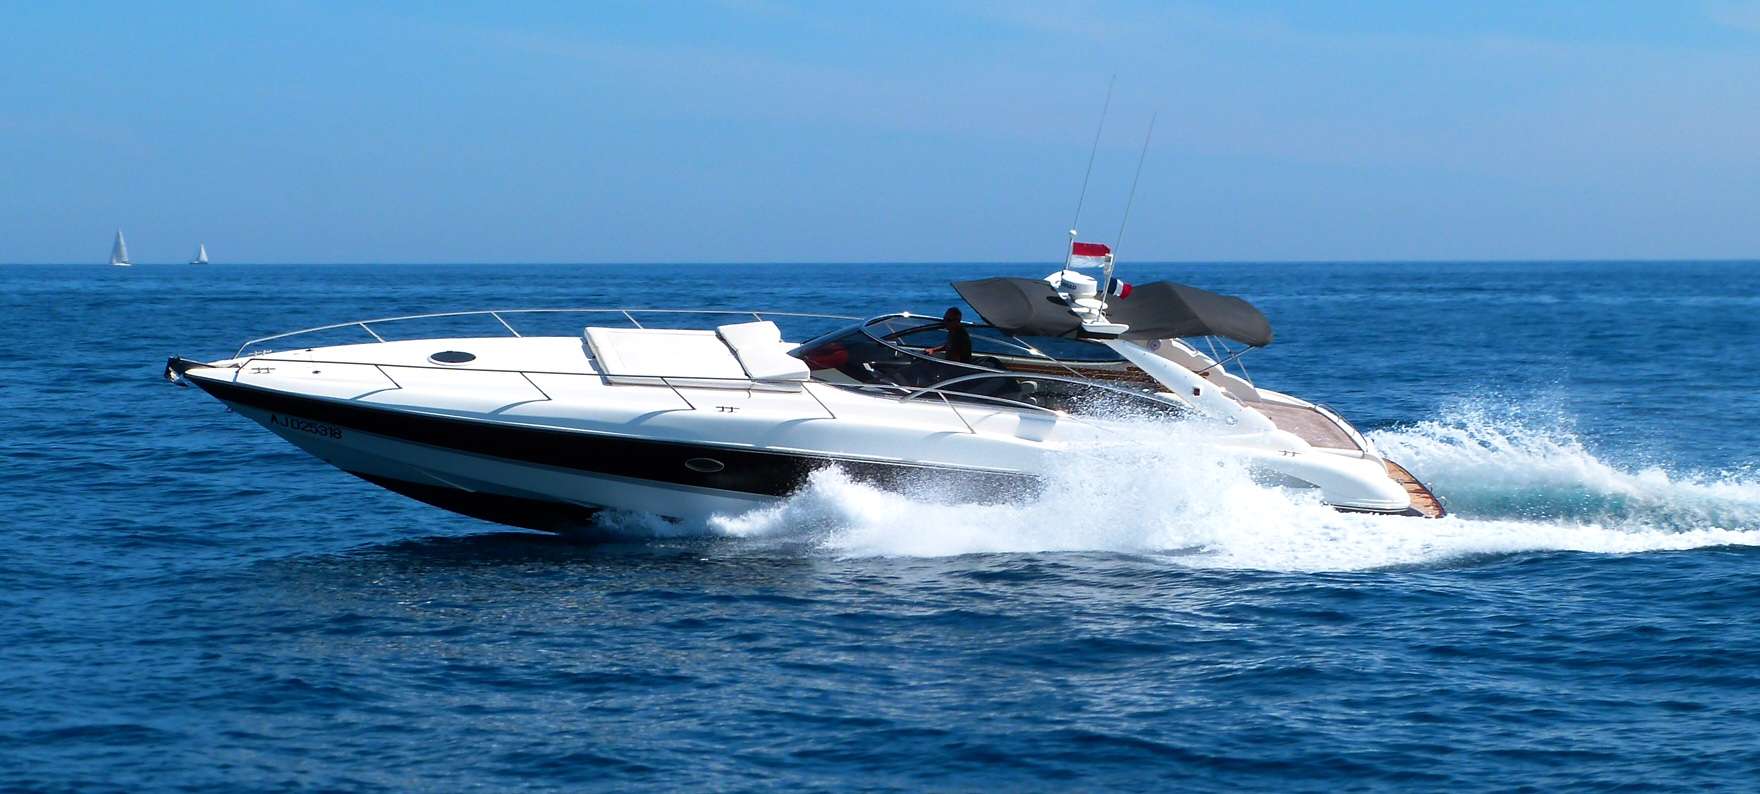 Sunseeker 48 - Yacht Charter Cannes & Boat hire in France French Riviera Cannes Vieux port de Vallauris 4